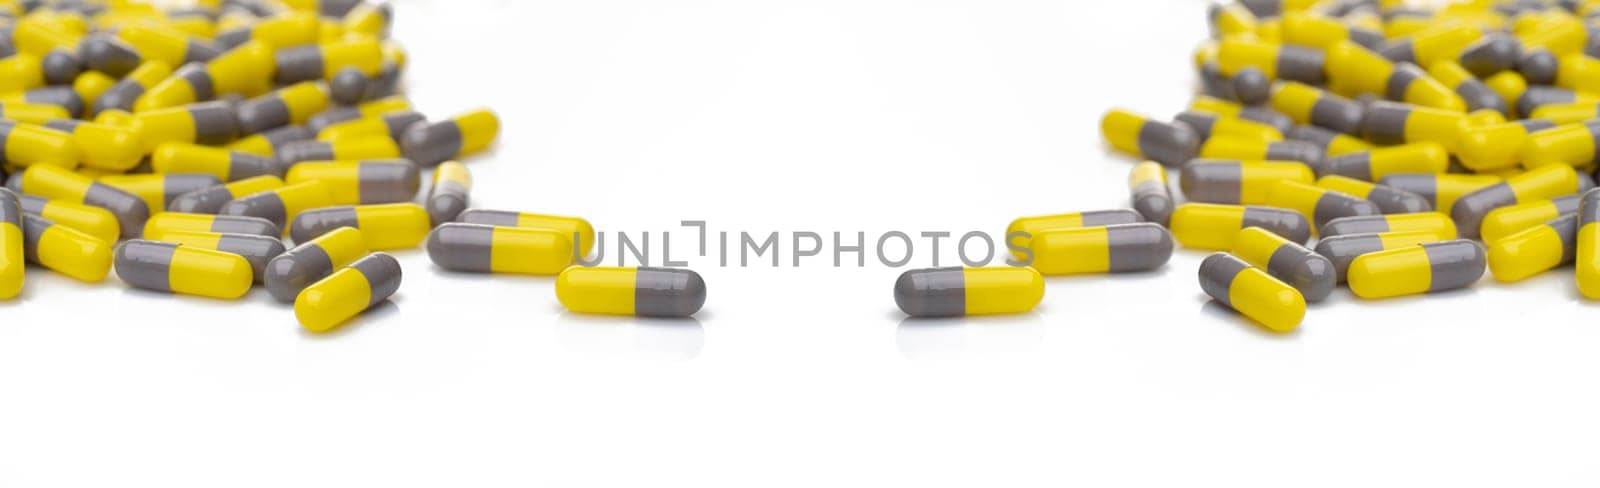 Yellow and gray probiotic capsule pill on white background. Probiotic supplement. Gut health. Dietary supplements. Probiotics for a healthy gut. Lactobacillus acidophilus and Bifidobacterium animalis.